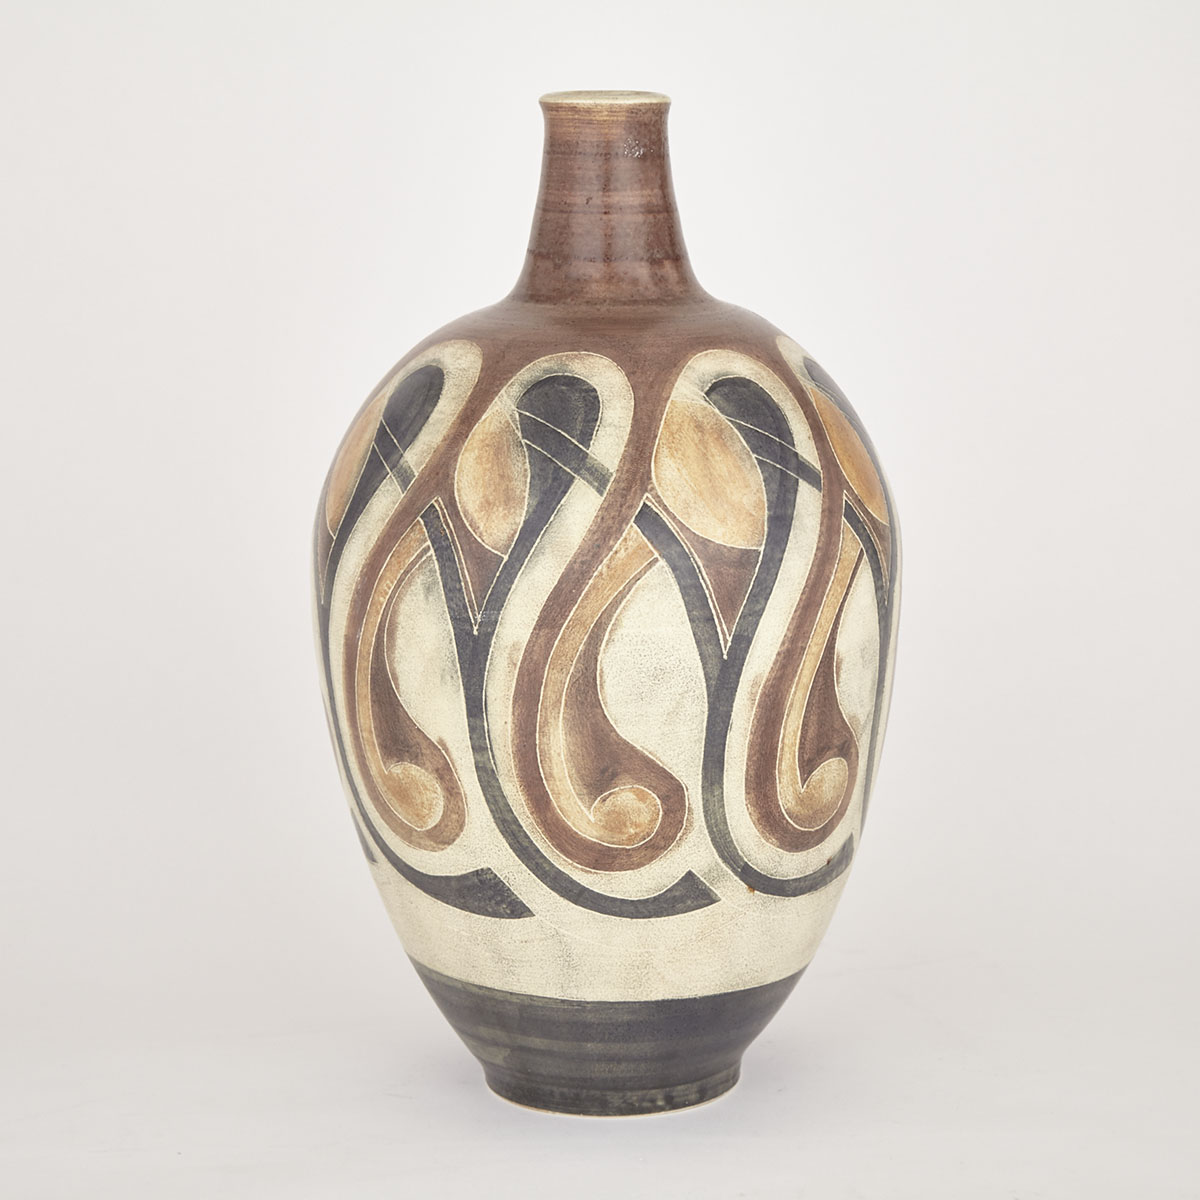 Brooklin Pottery Large Vase, Theo and Susan Harlander, c.1980